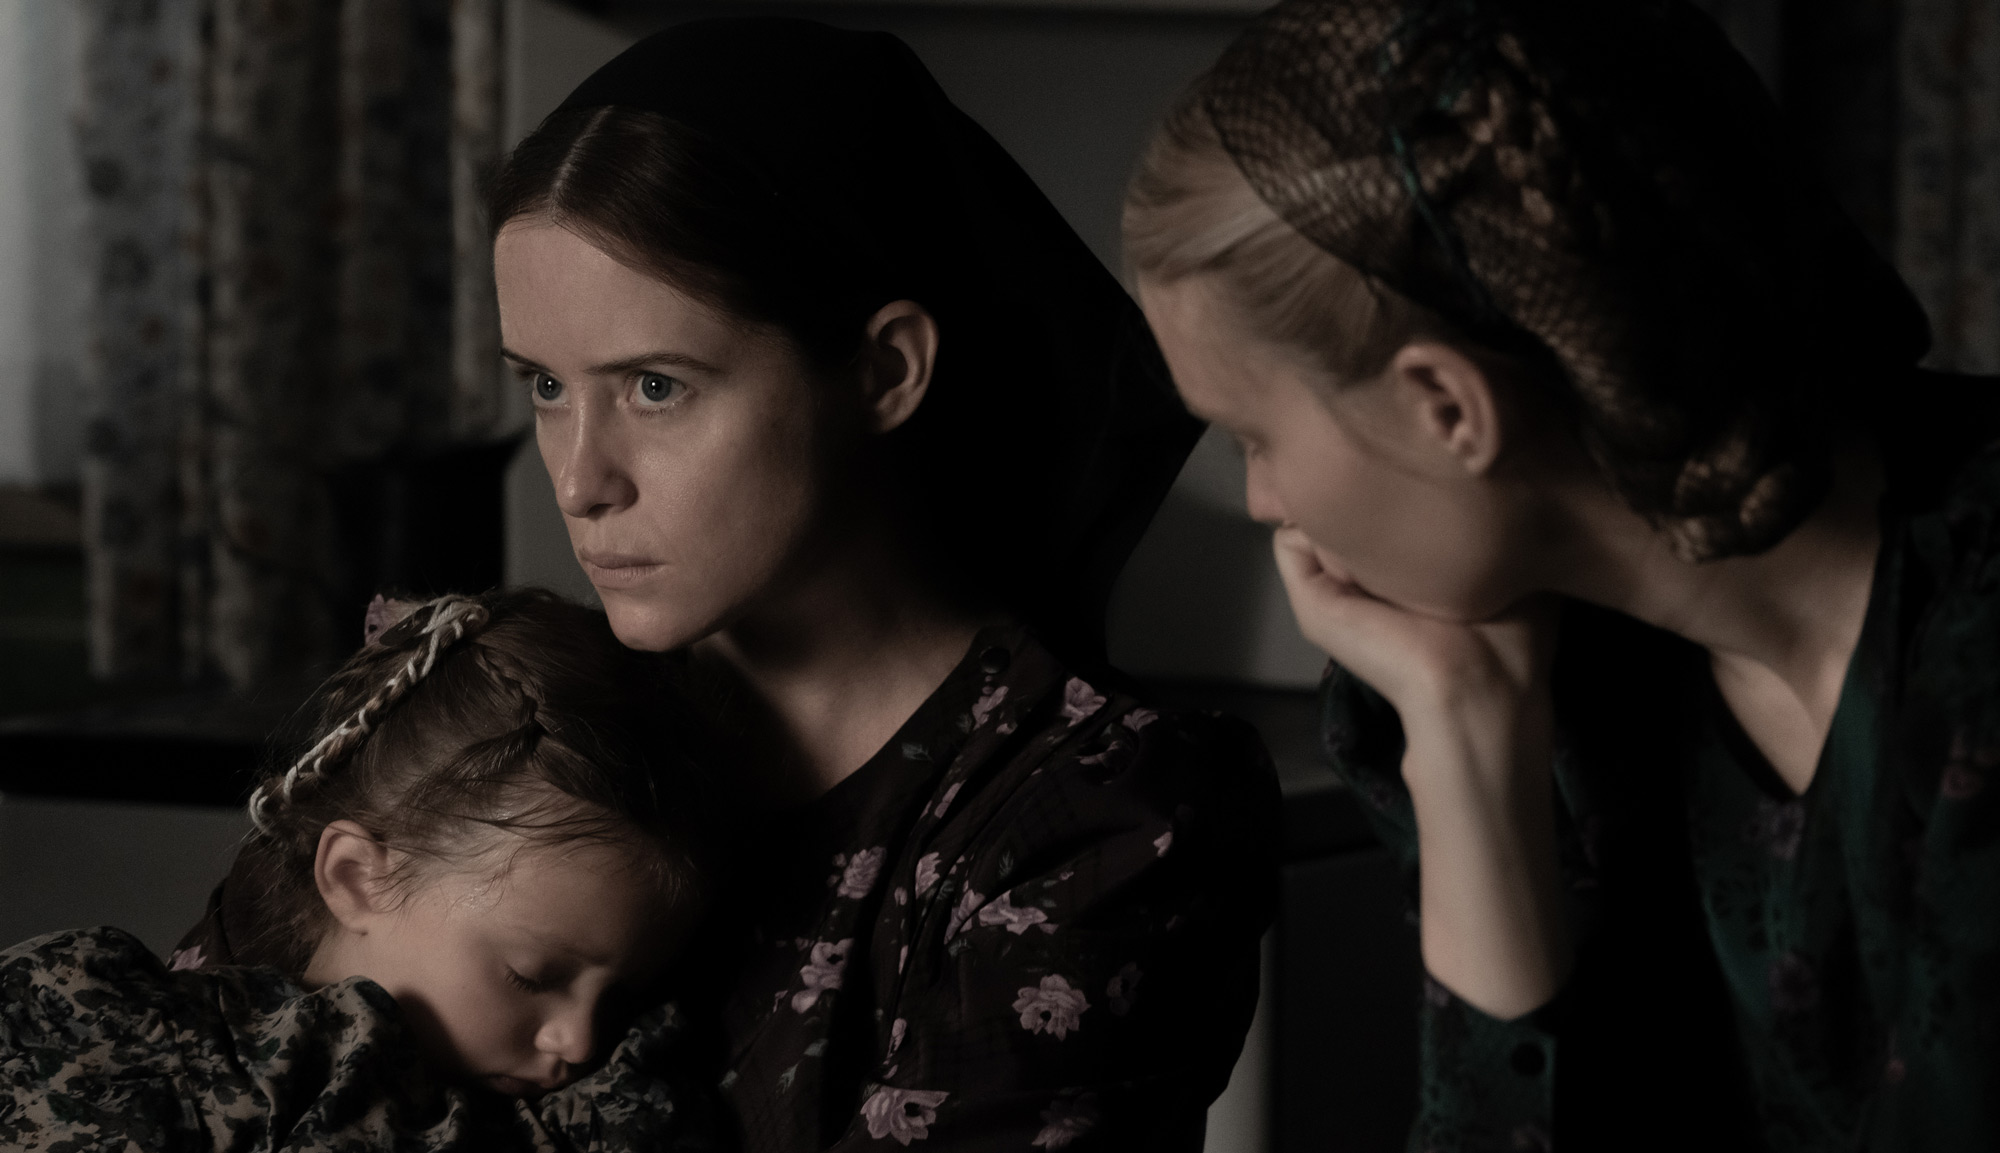 Claire Foy and Rooney Mara in "Women Talking"